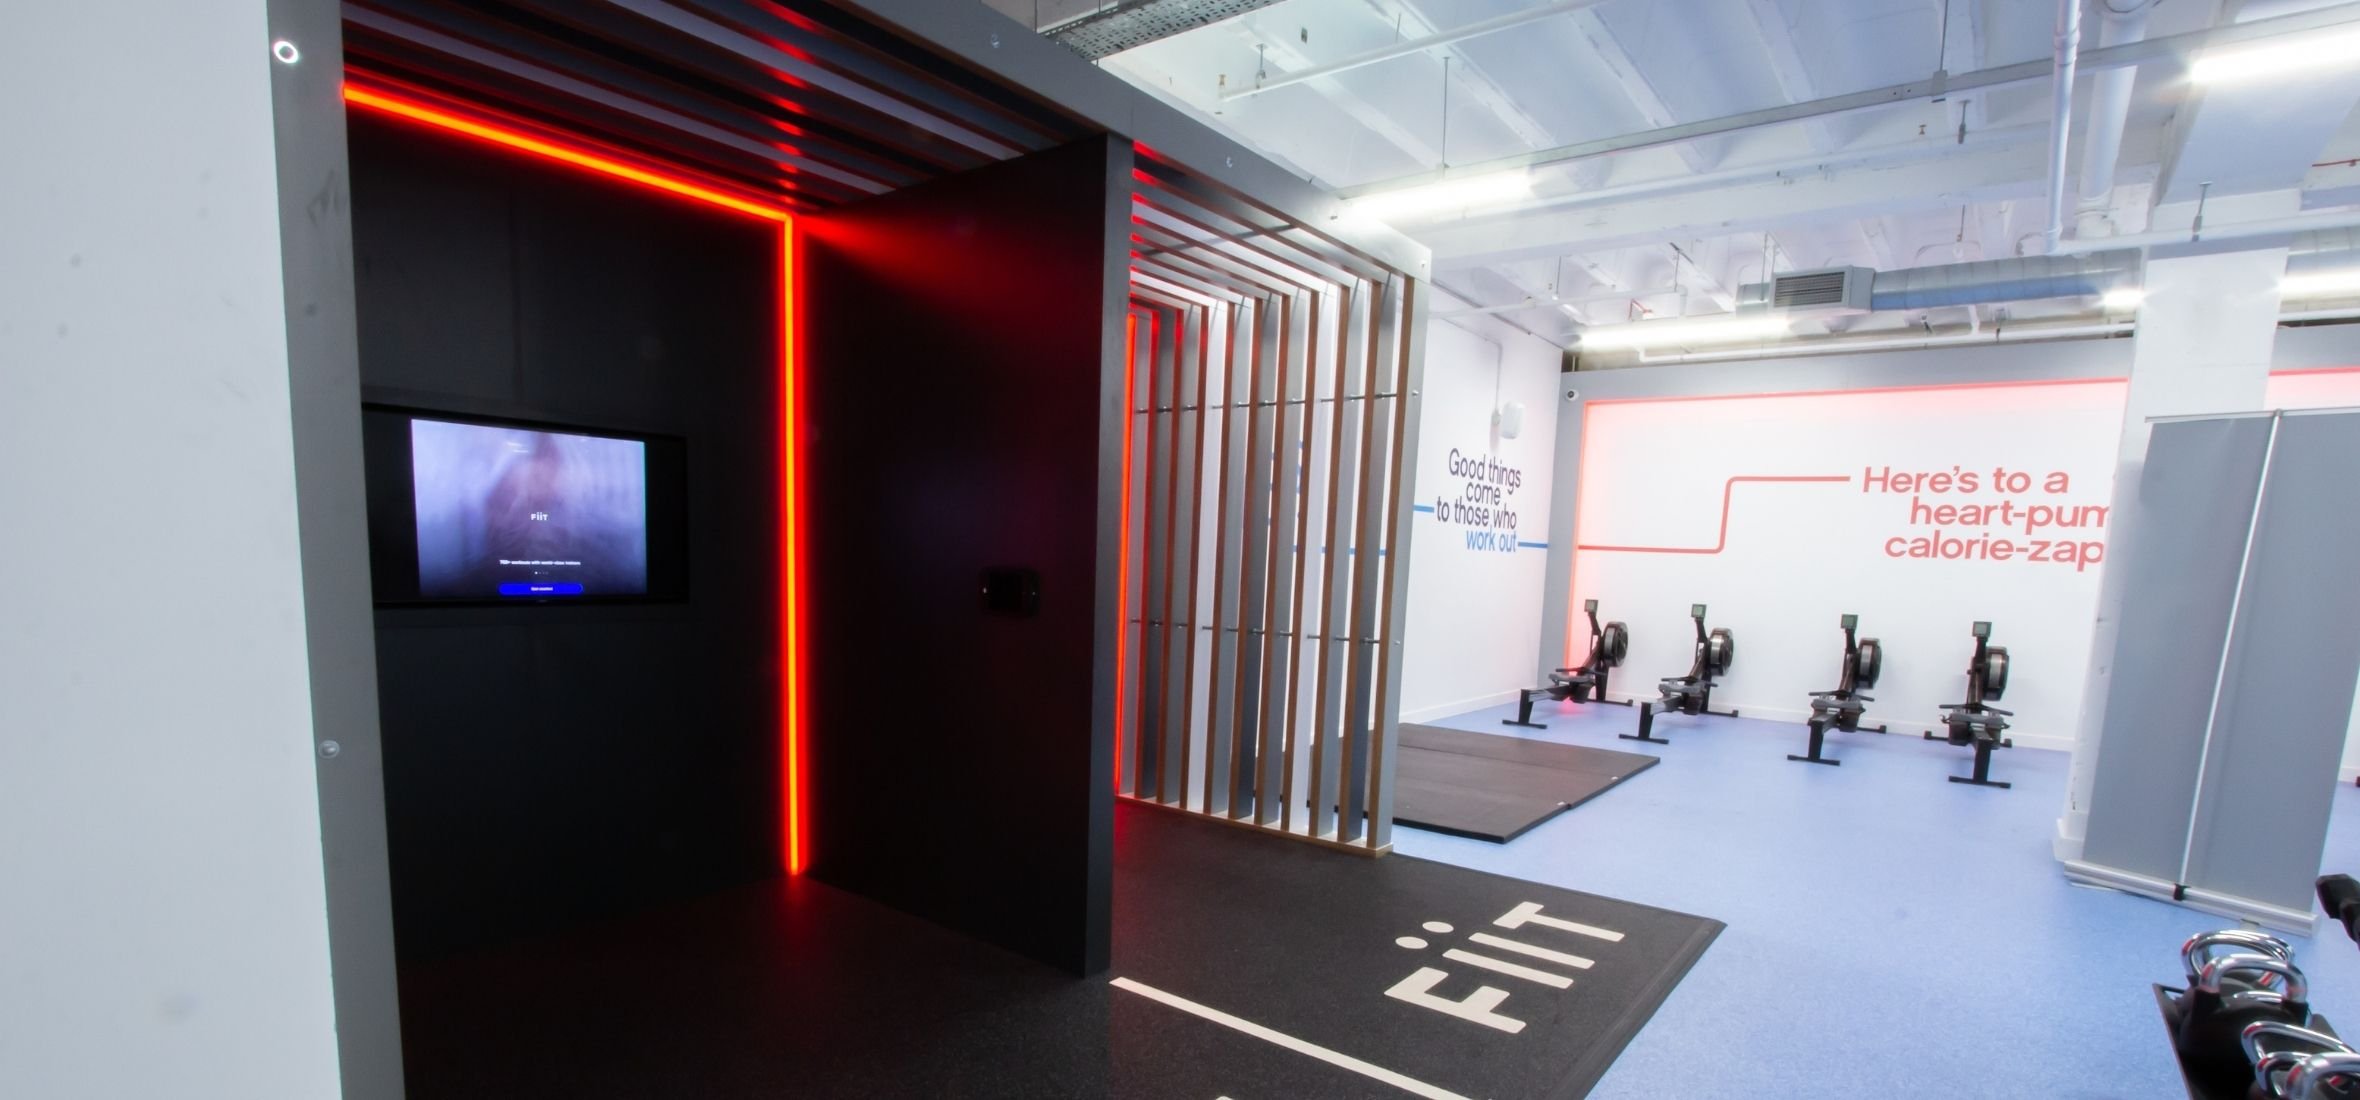 An AV Fiit pod at a gym for running private virtual fitness classes